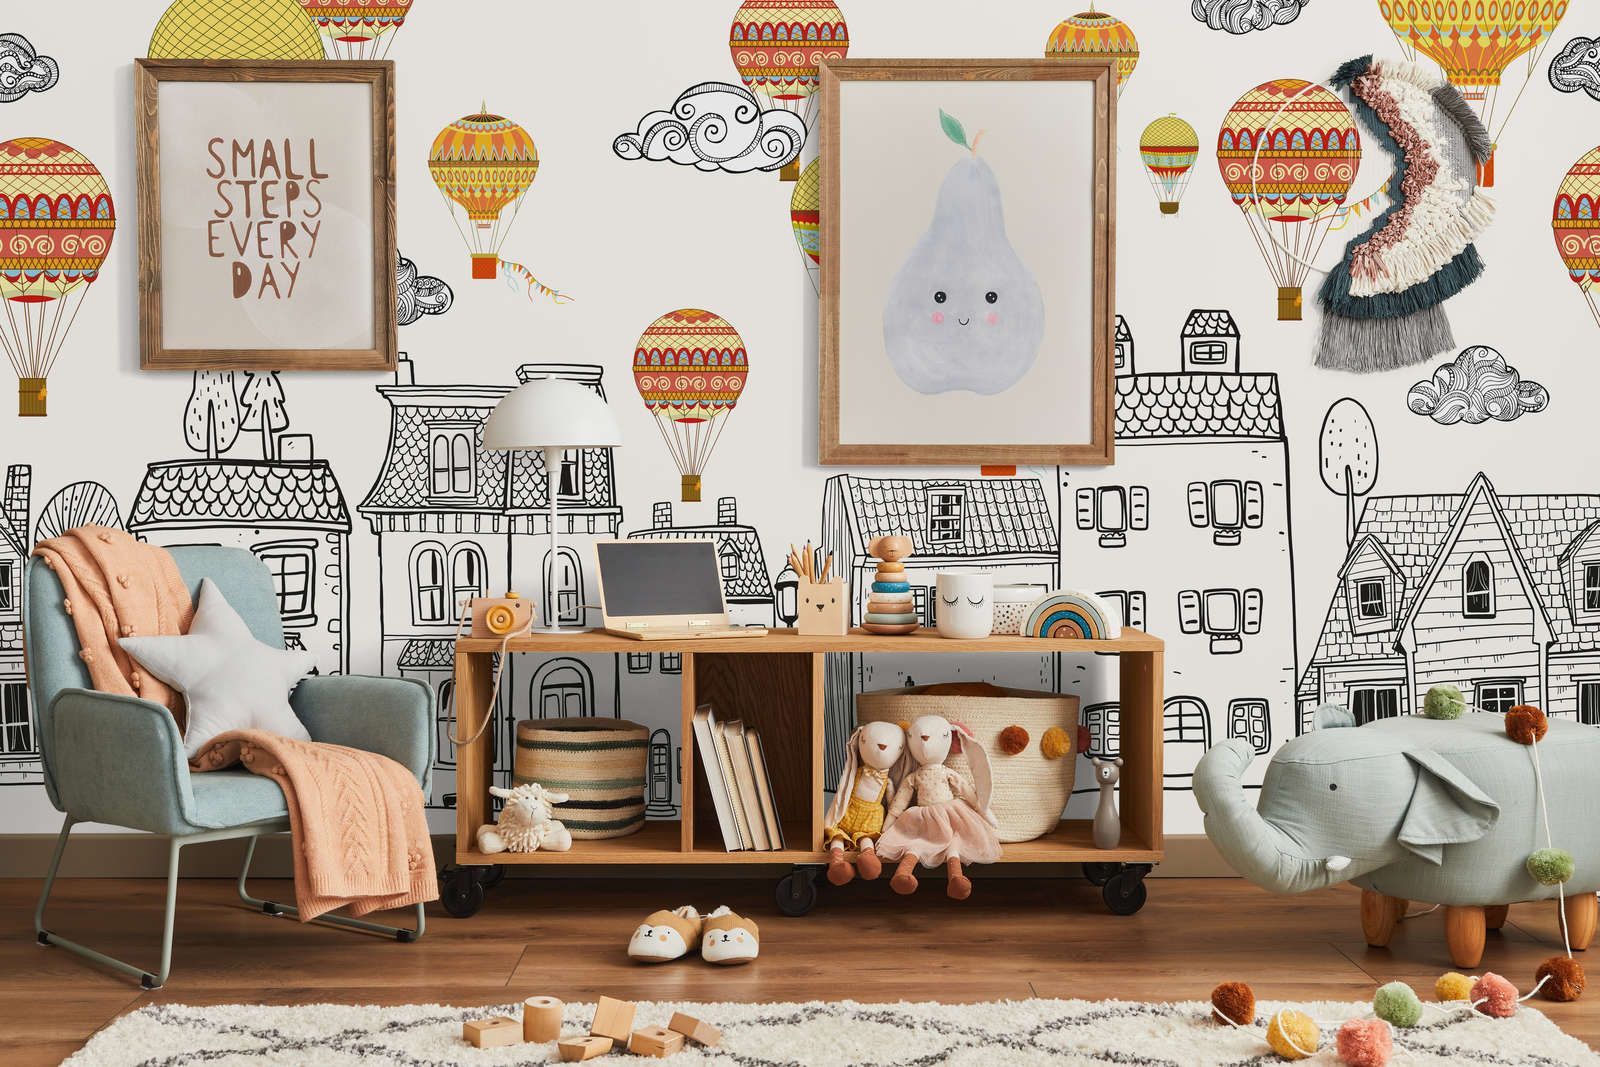             Small Town with Hot Air Balloons Wallpaper - Textured Non-woven
        